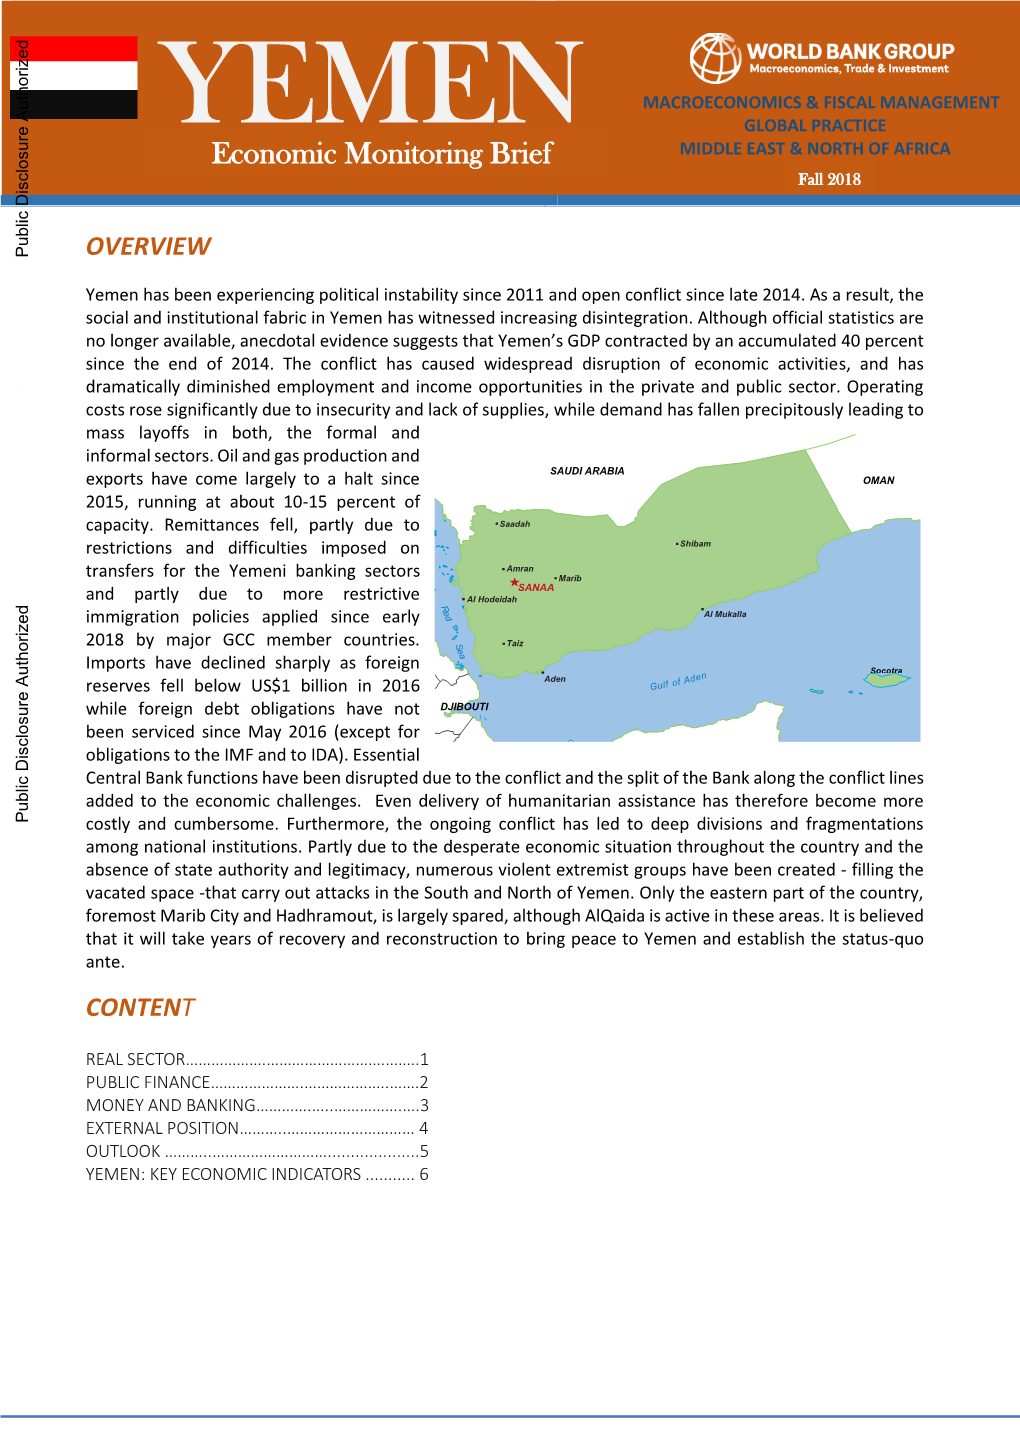 YEMEN GLOBAL PRACTICE Economic Monitoring Brief MIDDLE EAST & NORTH of AFRICA Fall 2018